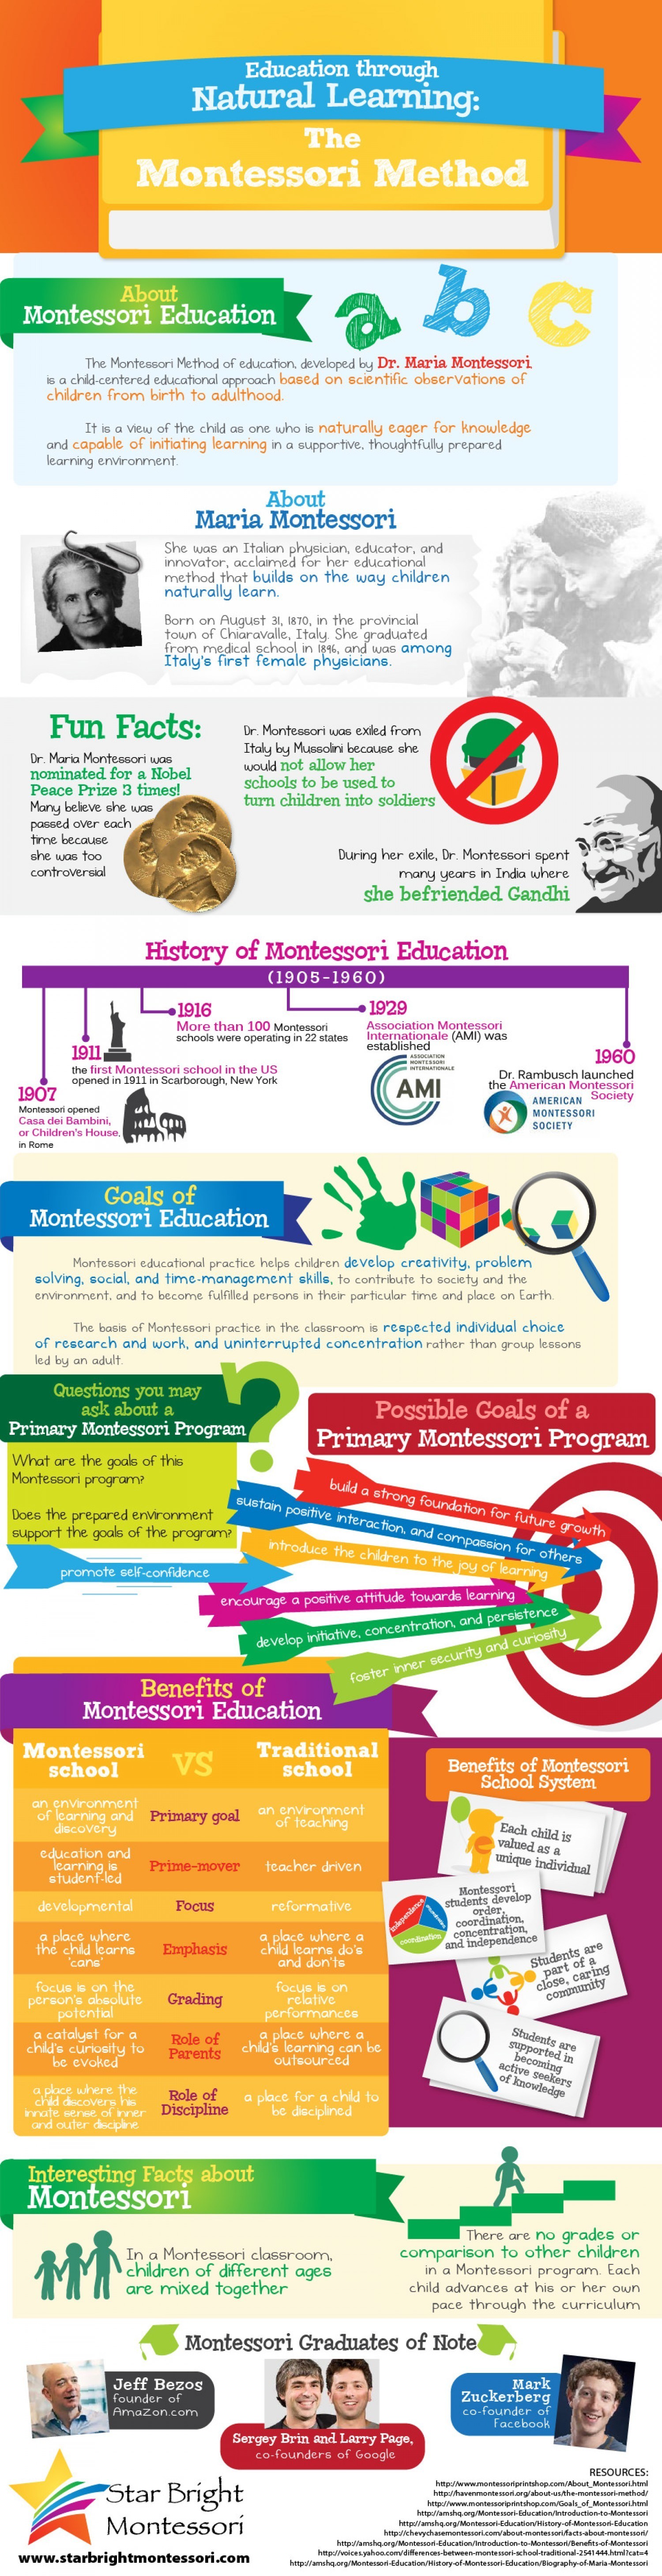 Education Through Natural Learning Infographic